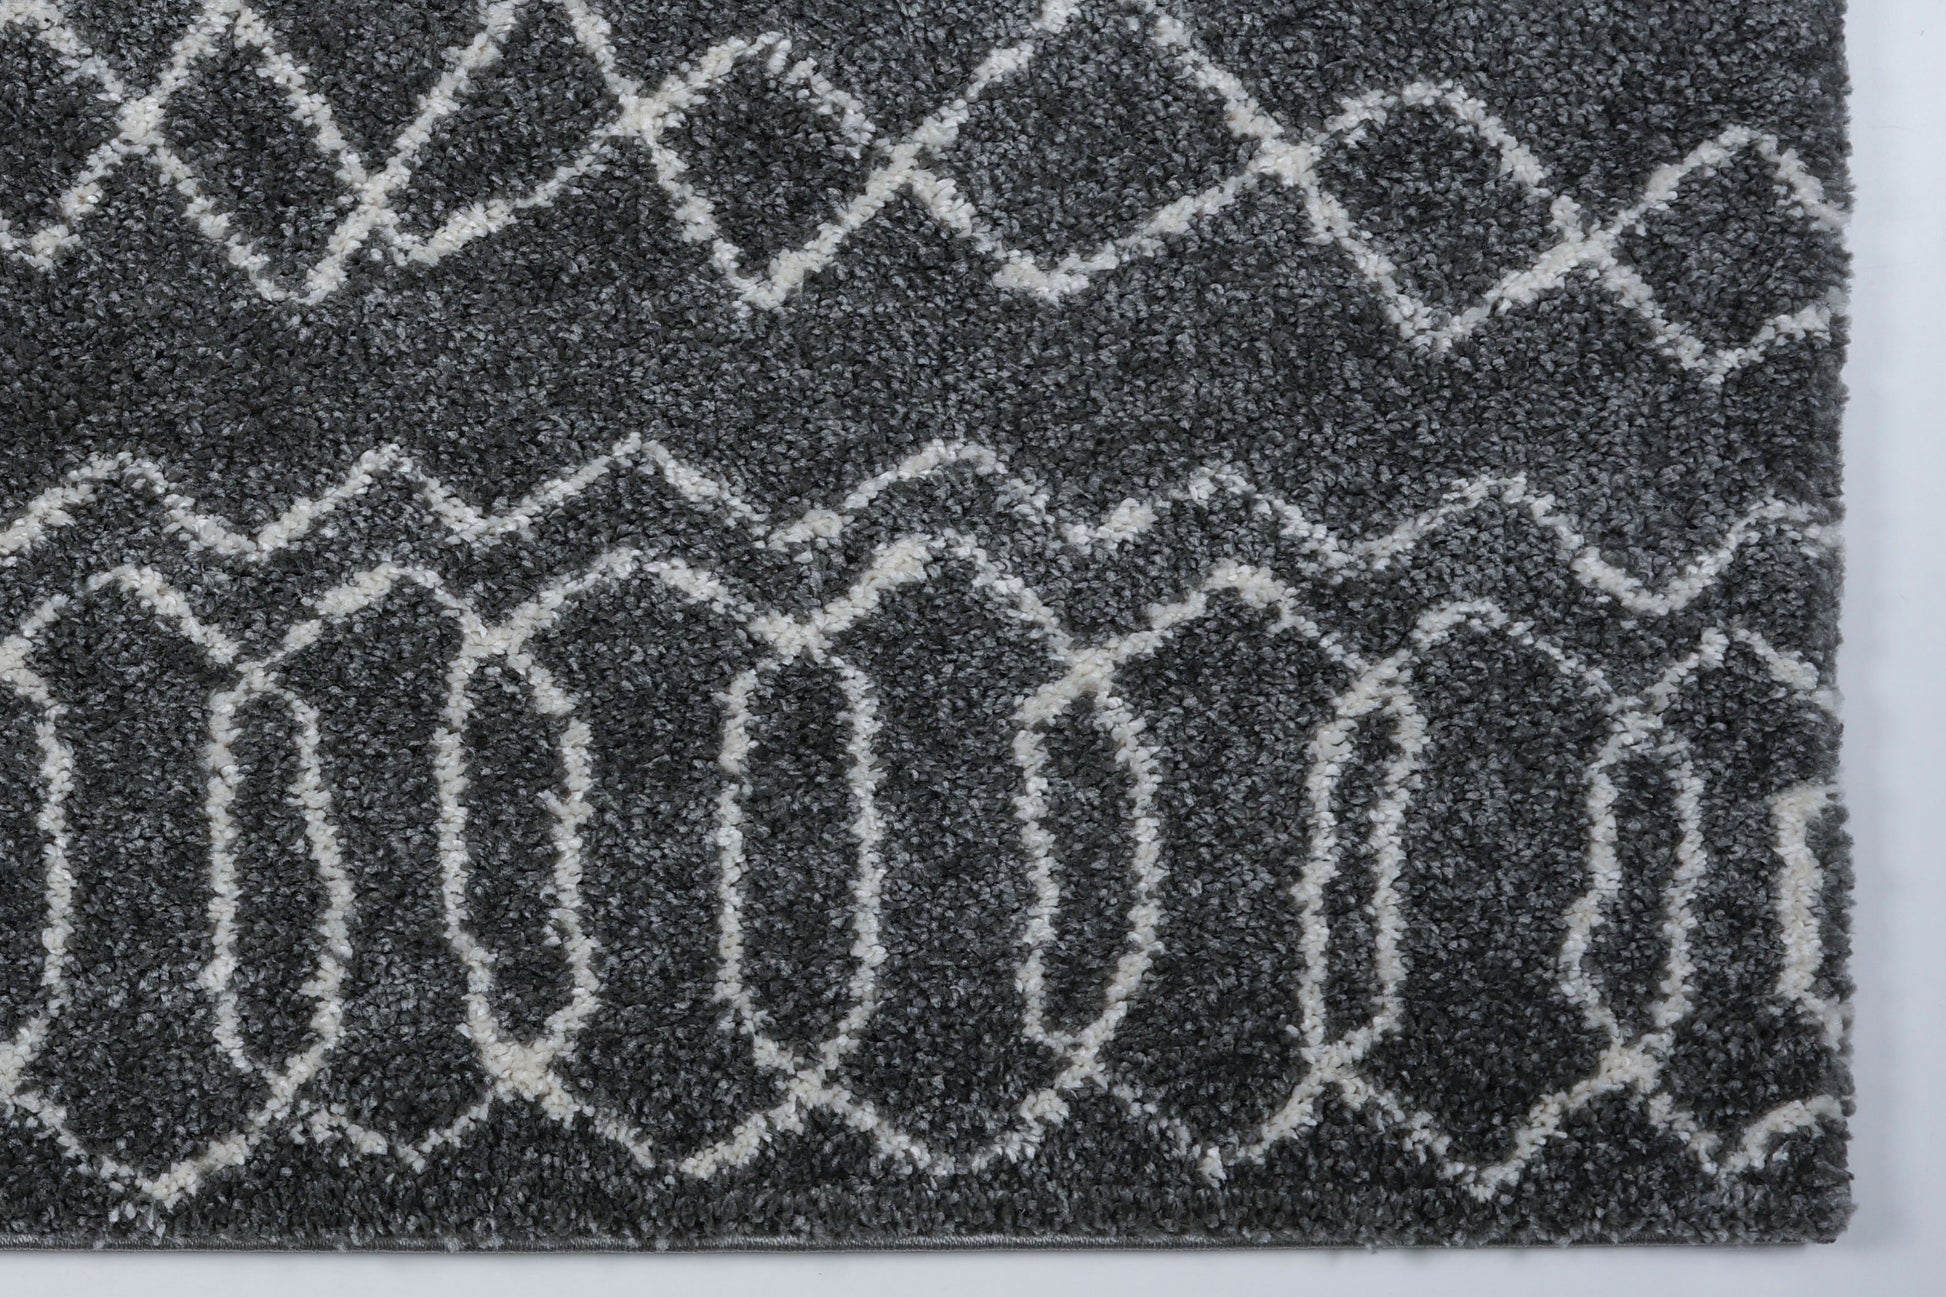 Shaggy Grey Ivory Vancouver Area Rug - 